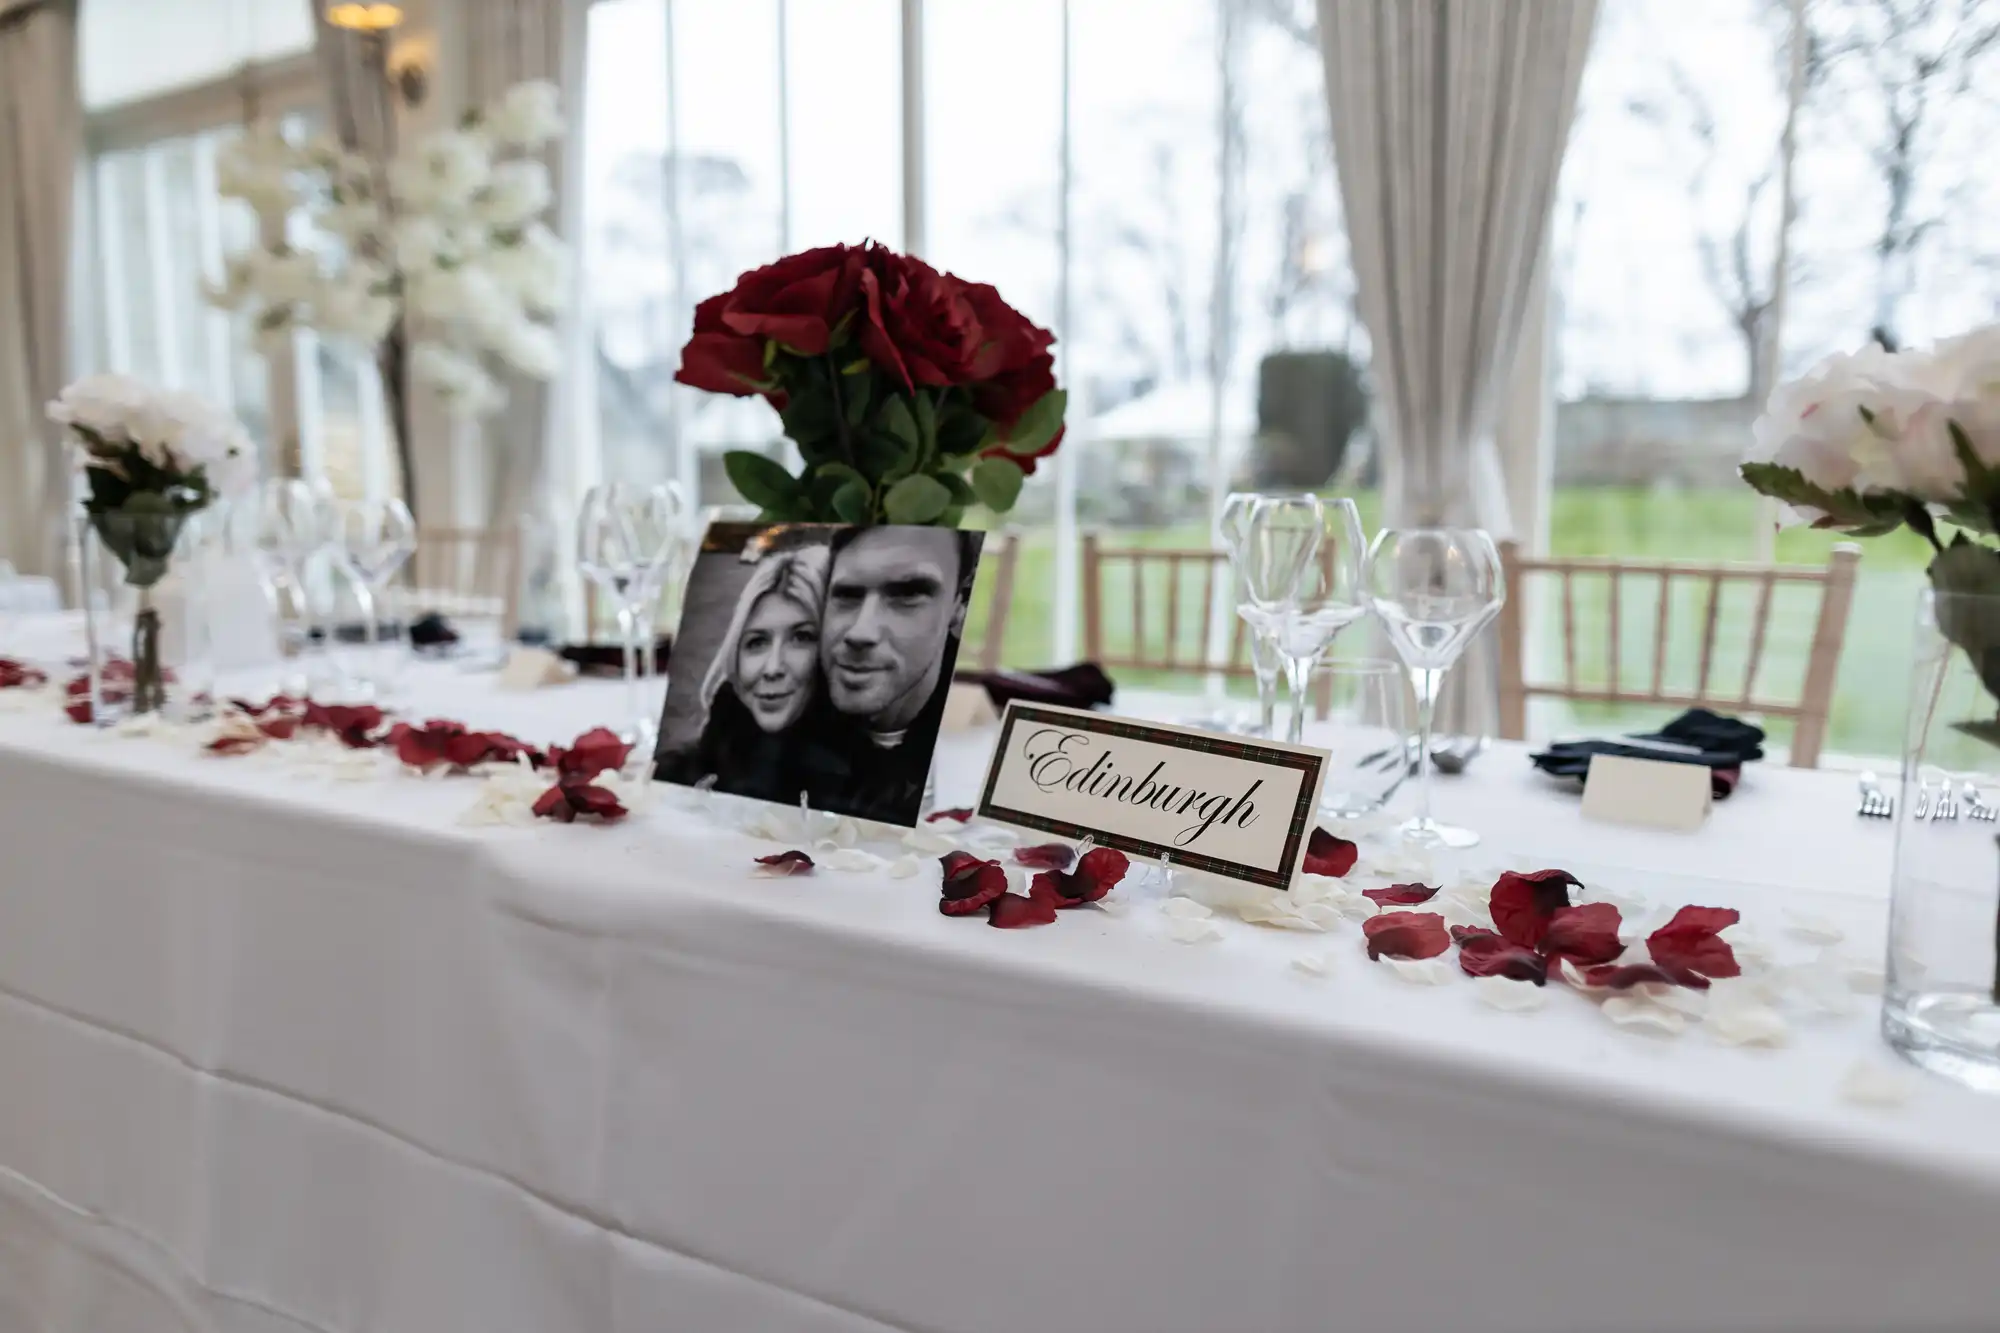 A table set for an event with roses, wine glasses, and a framed photograph. A card with the text "Edinburgh" is placed on the table among red rose petals.